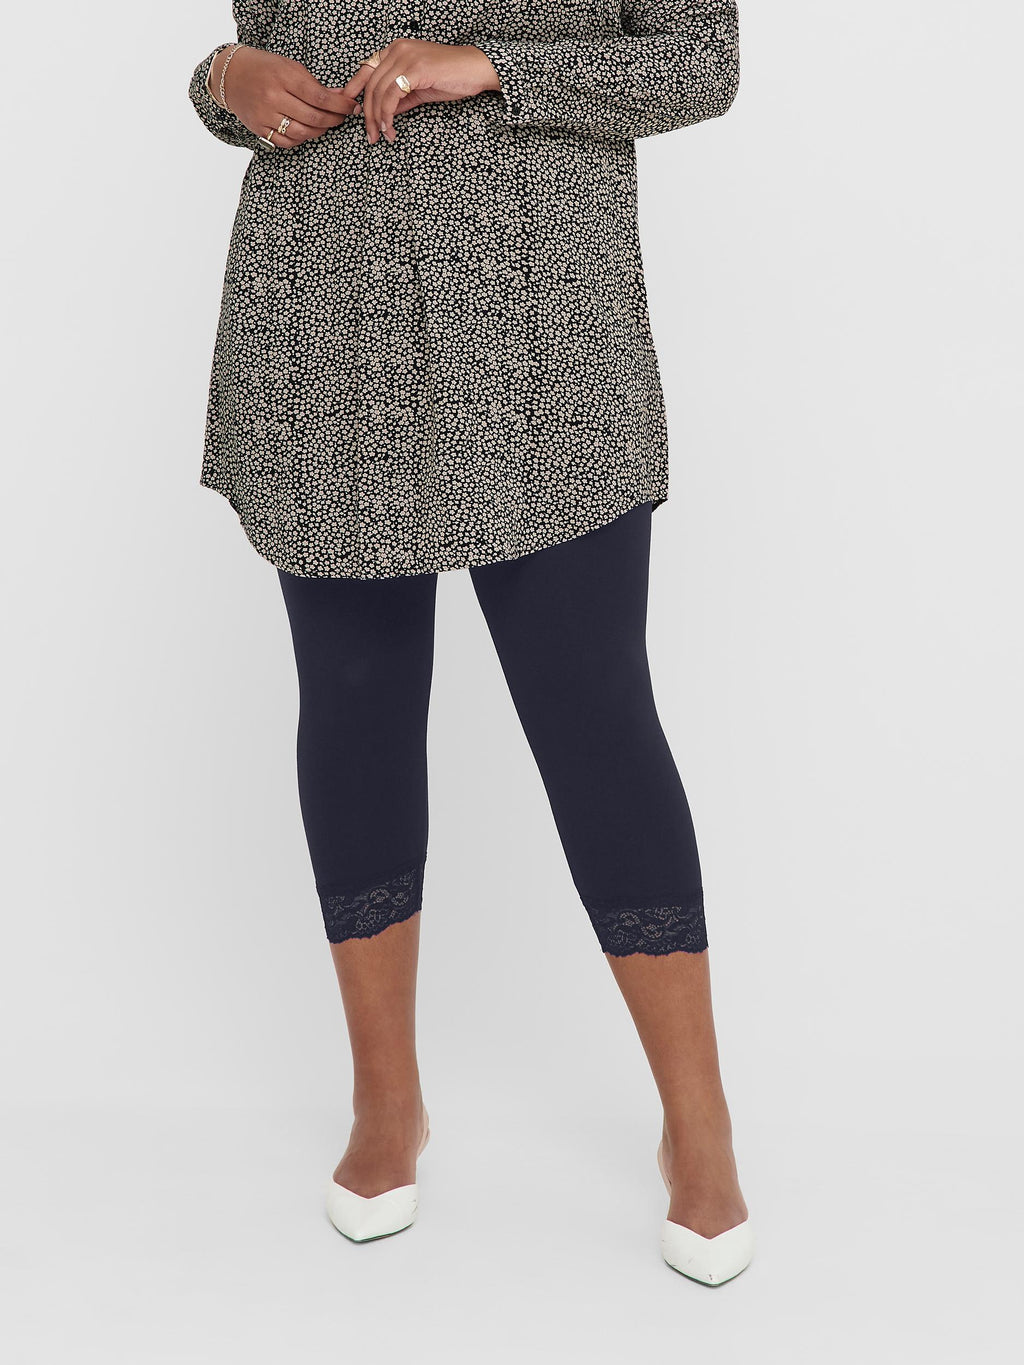 Only Cropped Legging in Navy, Plus Size Clothing